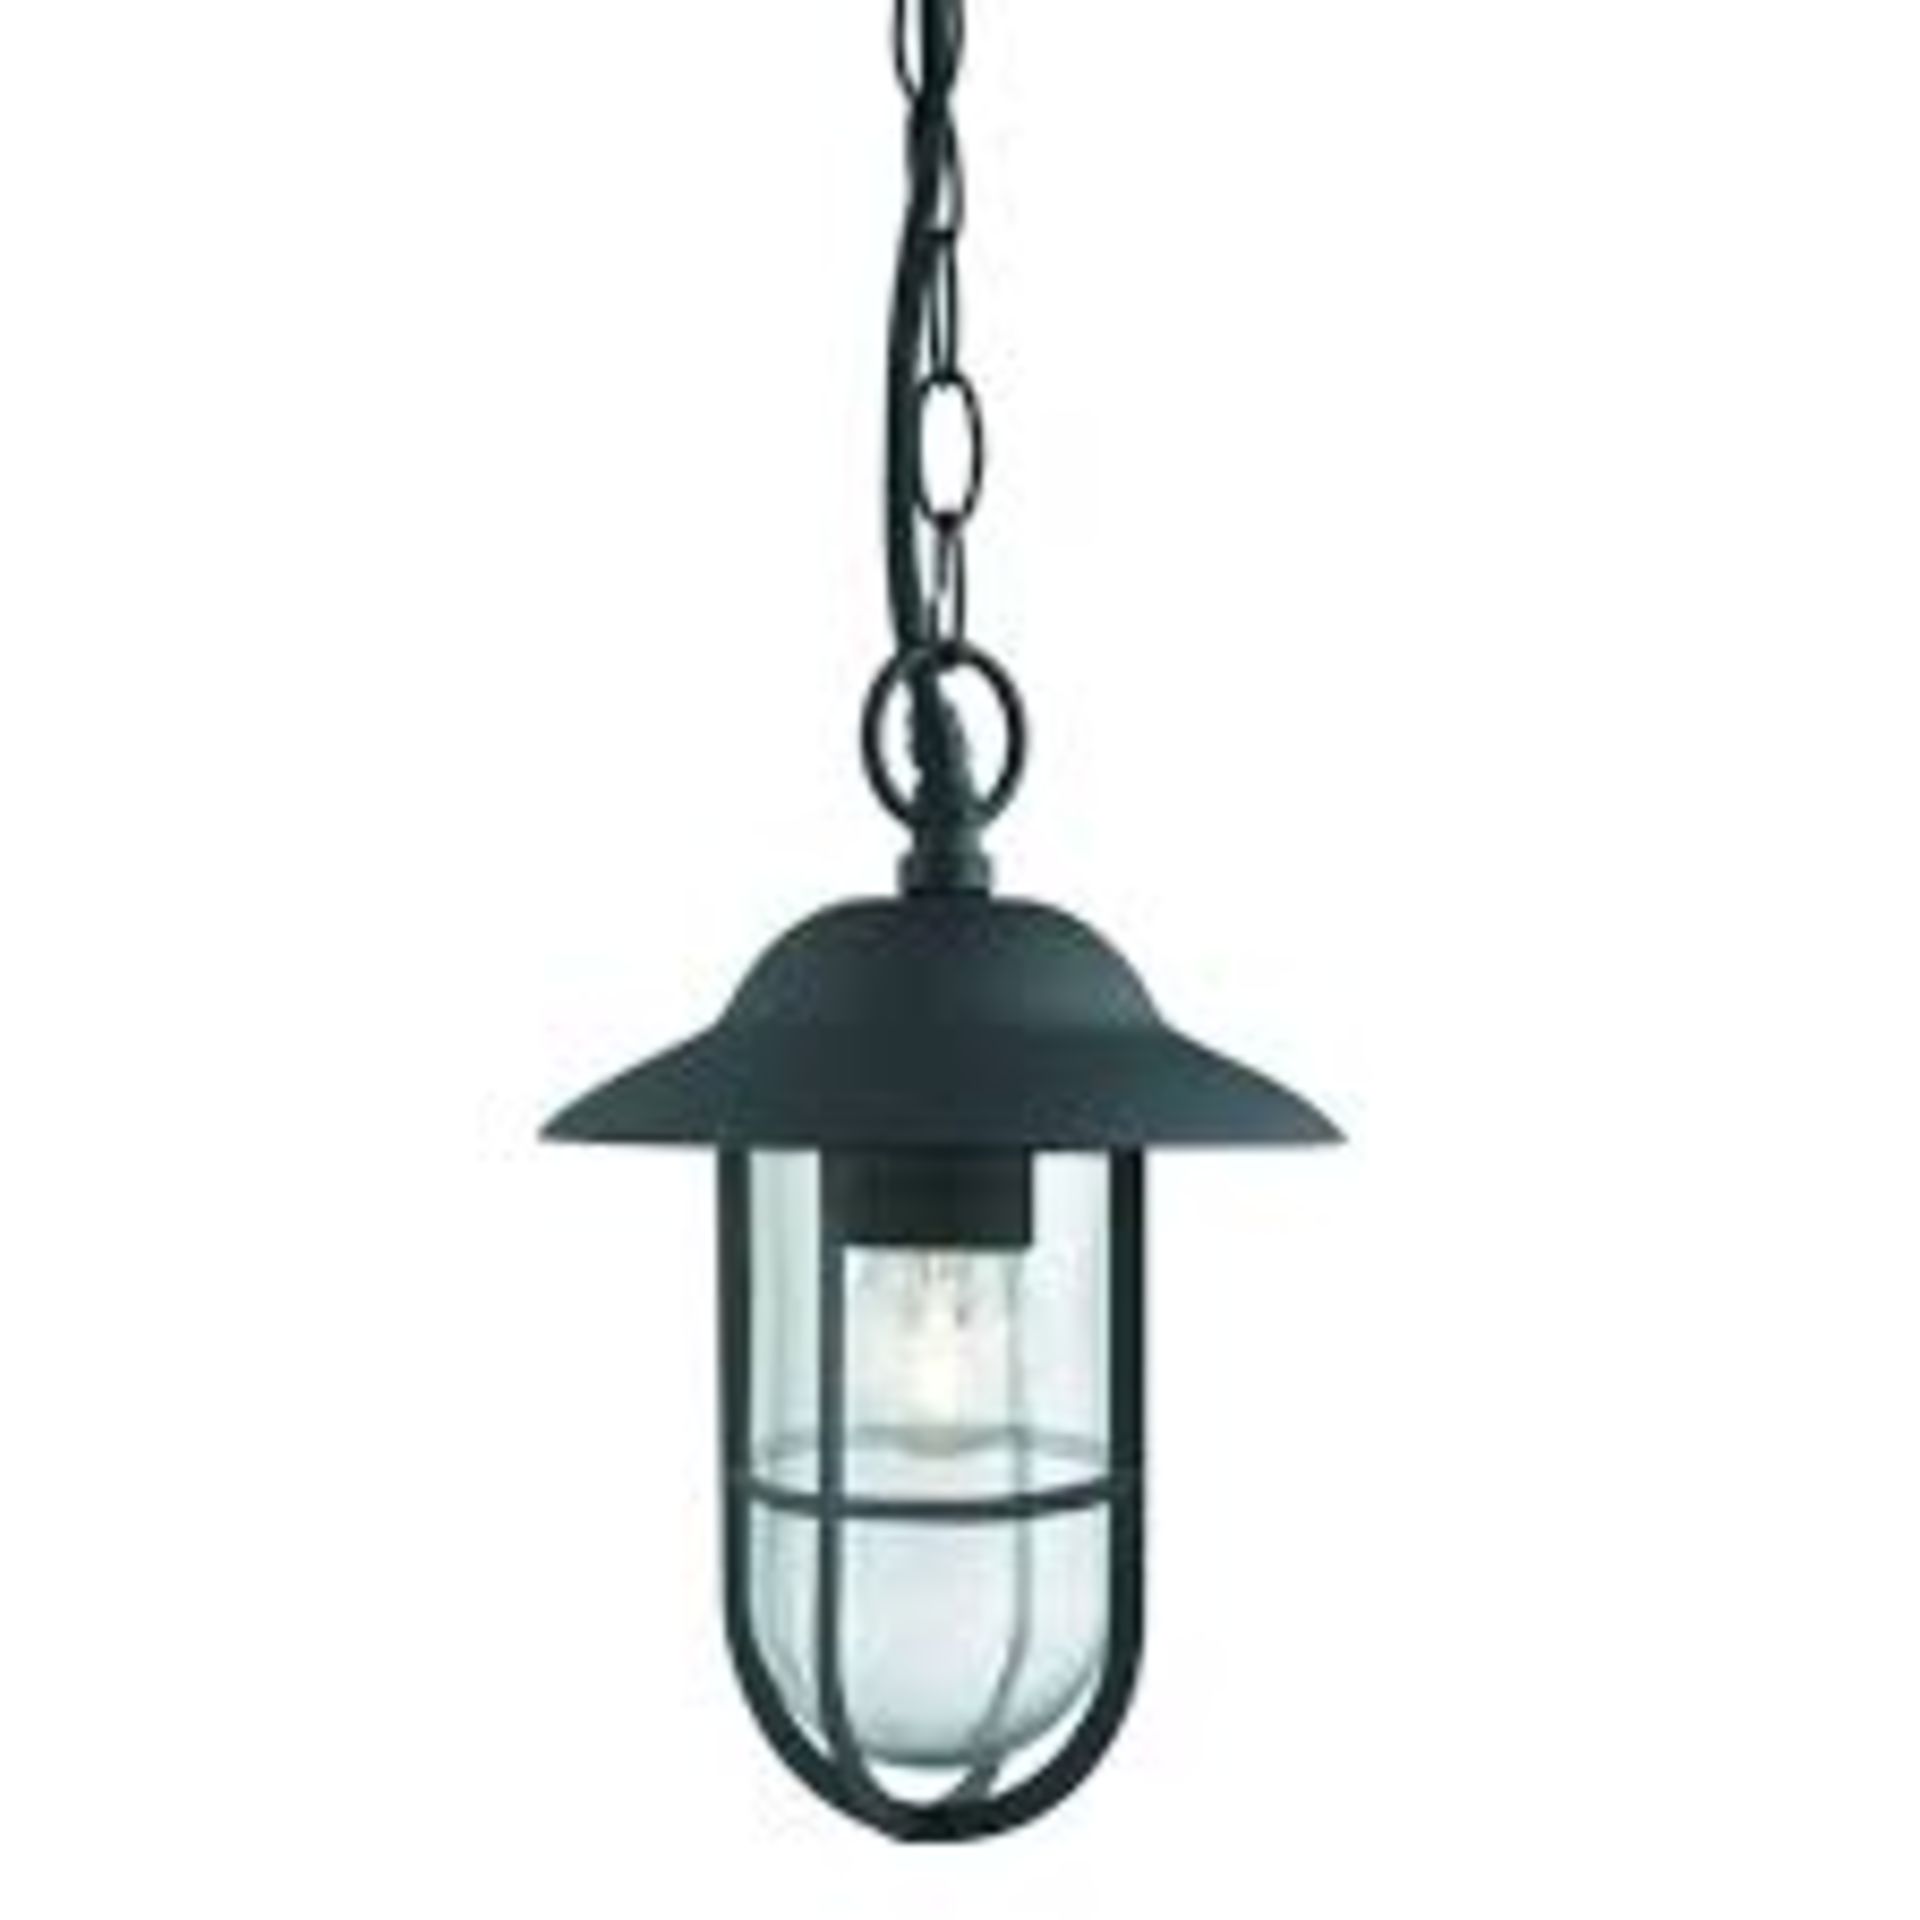 1 x Searchlight Well Glass Outdoor Pendant in matt black - Ref: 2191BK - New and Boxed - - Image 4 of 4